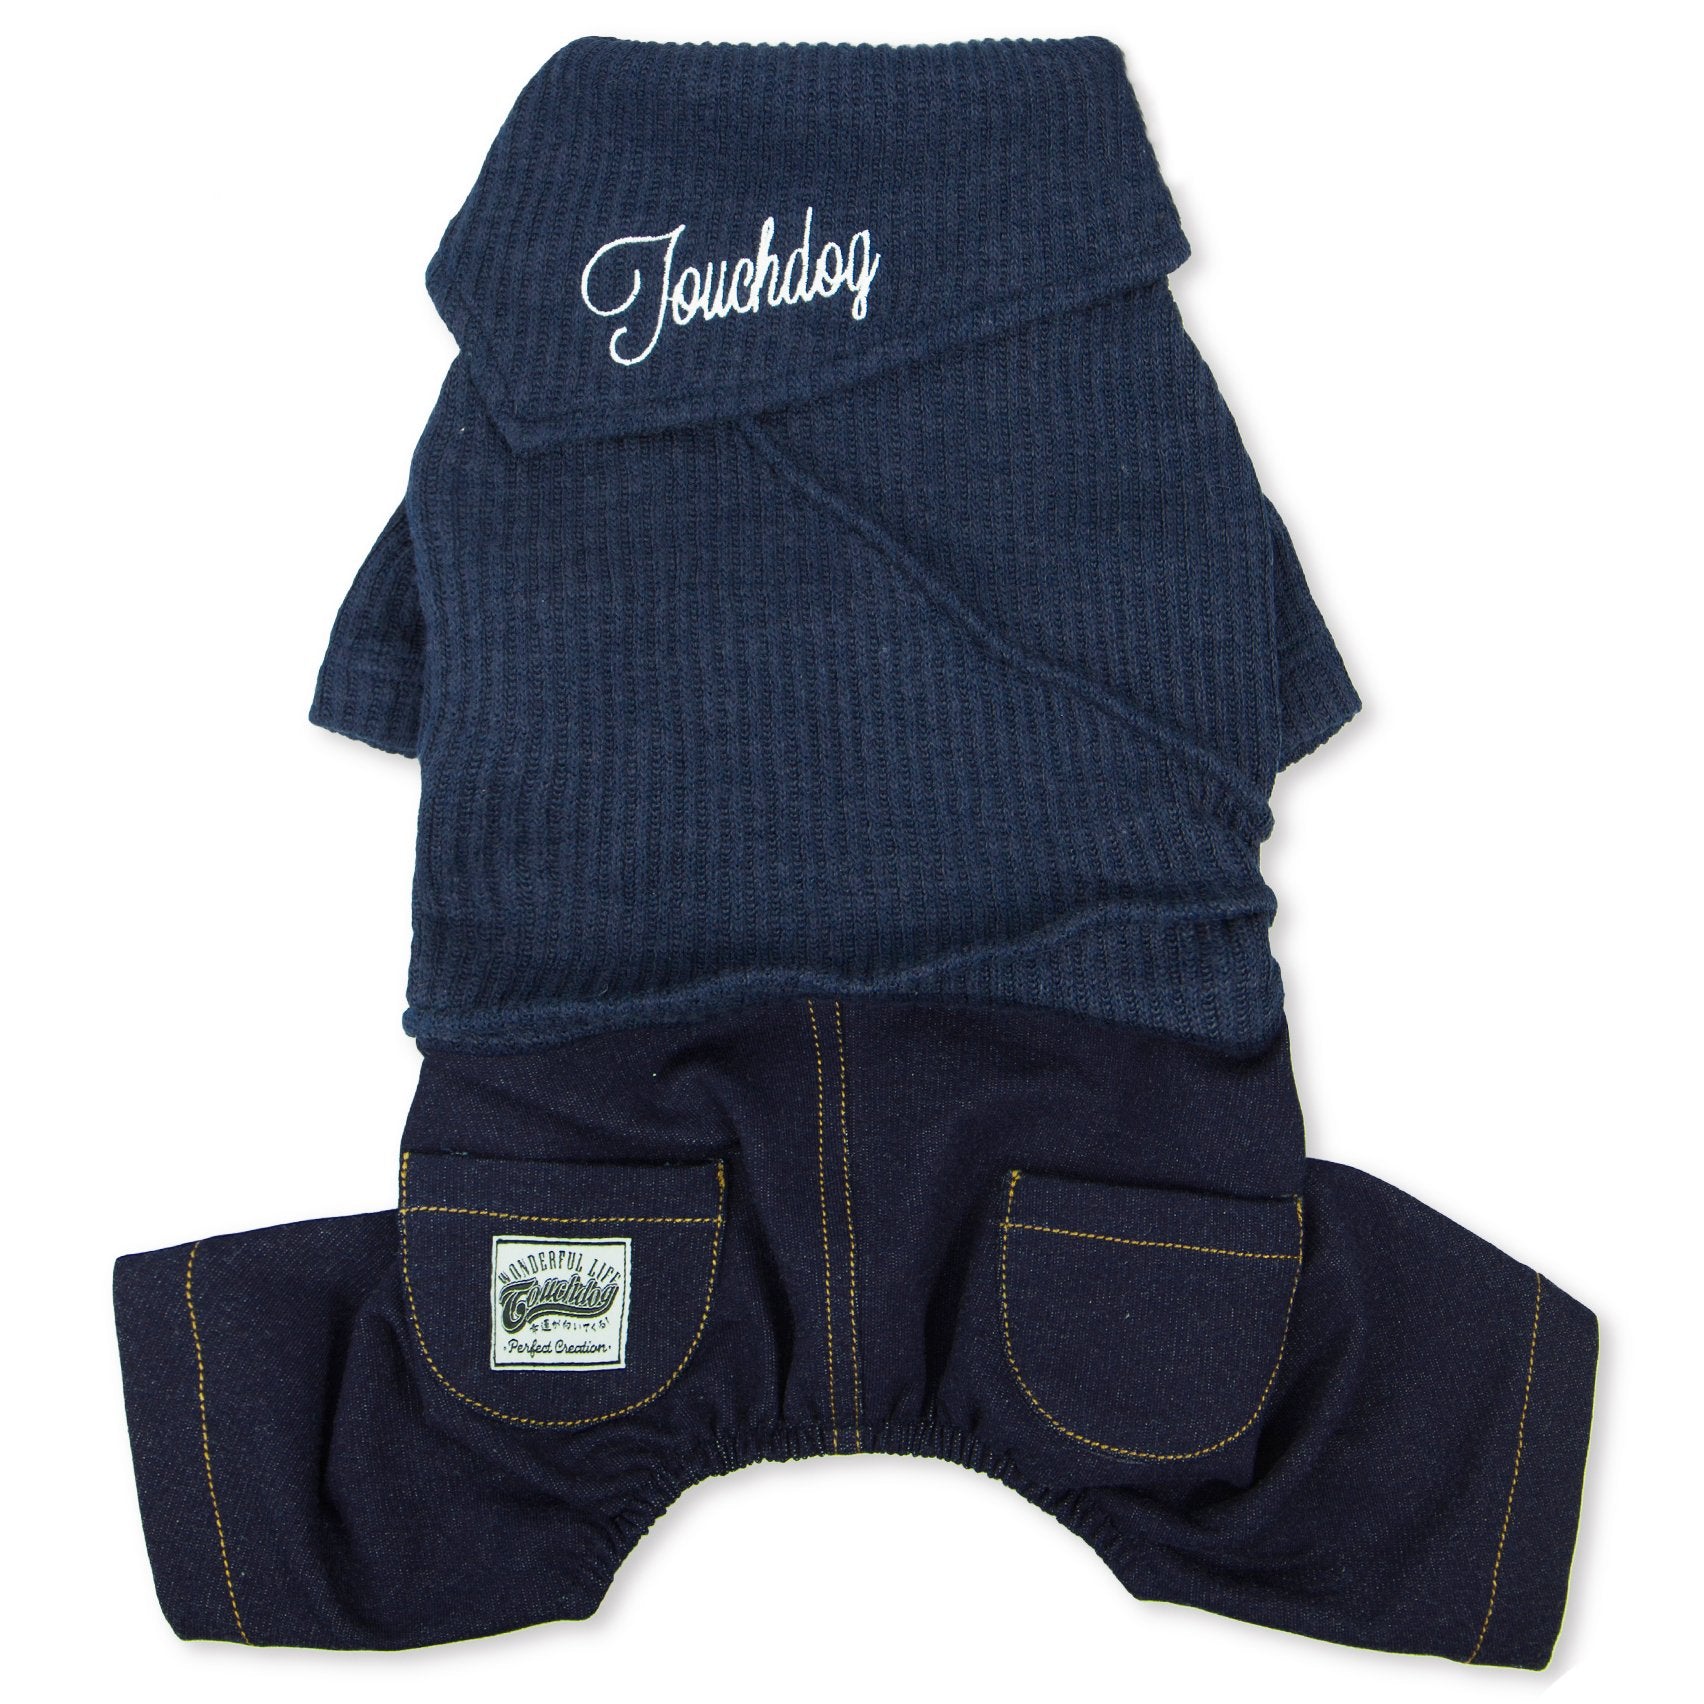 Touchdog Vogue Sweater & Denim Pant Outfit - Large - Navy